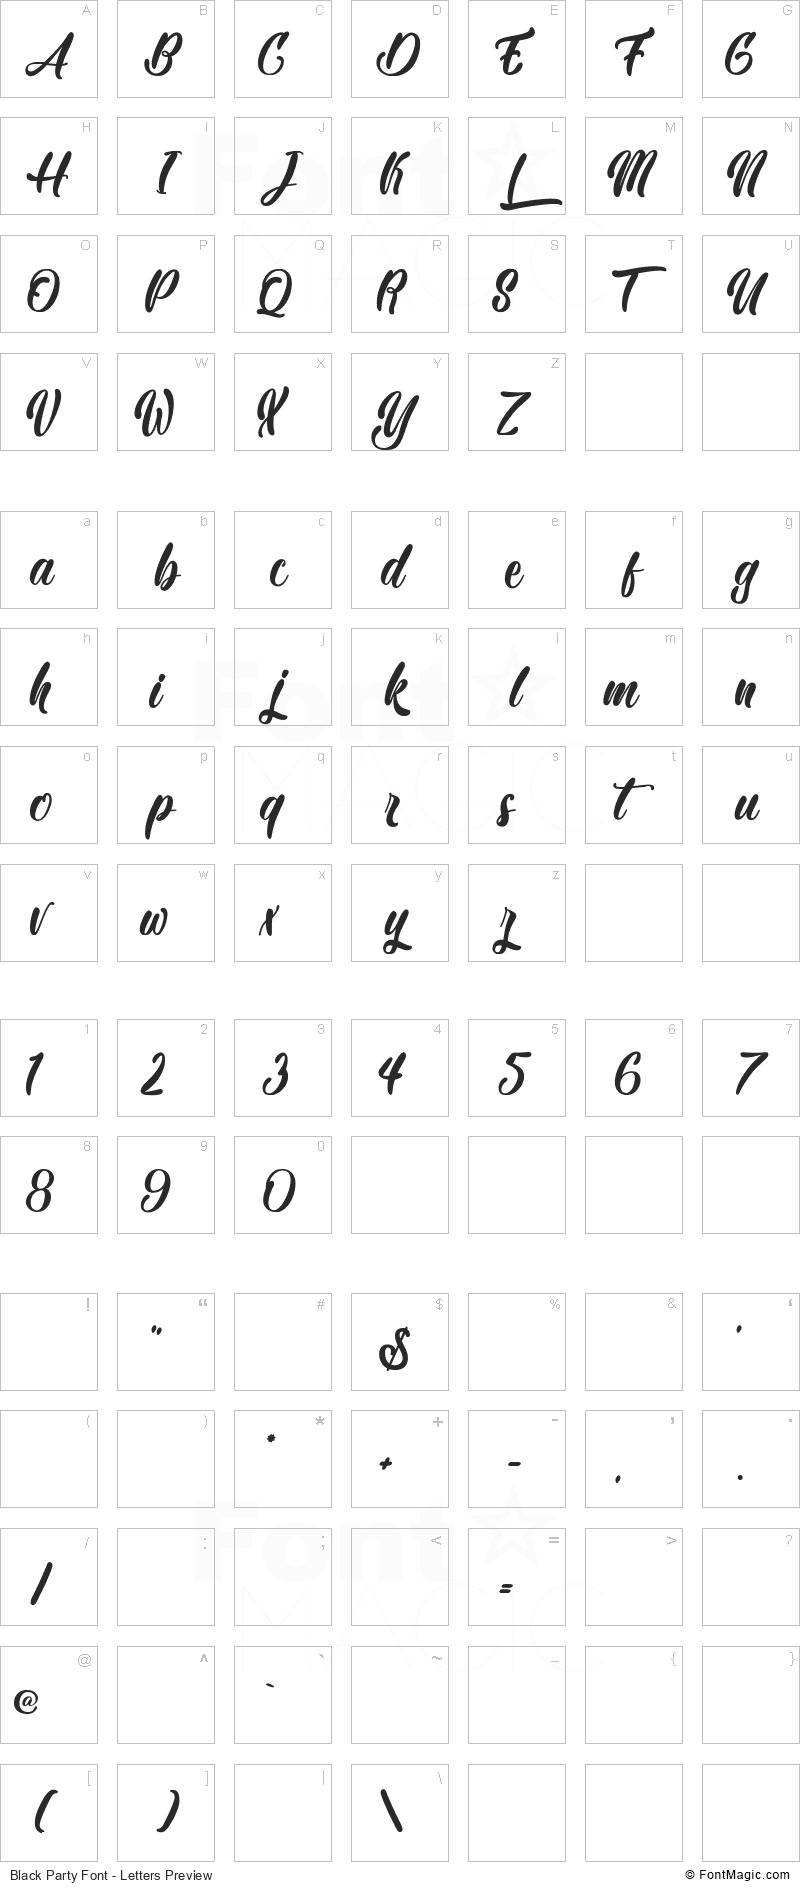 Black Party Font - All Latters Preview Chart